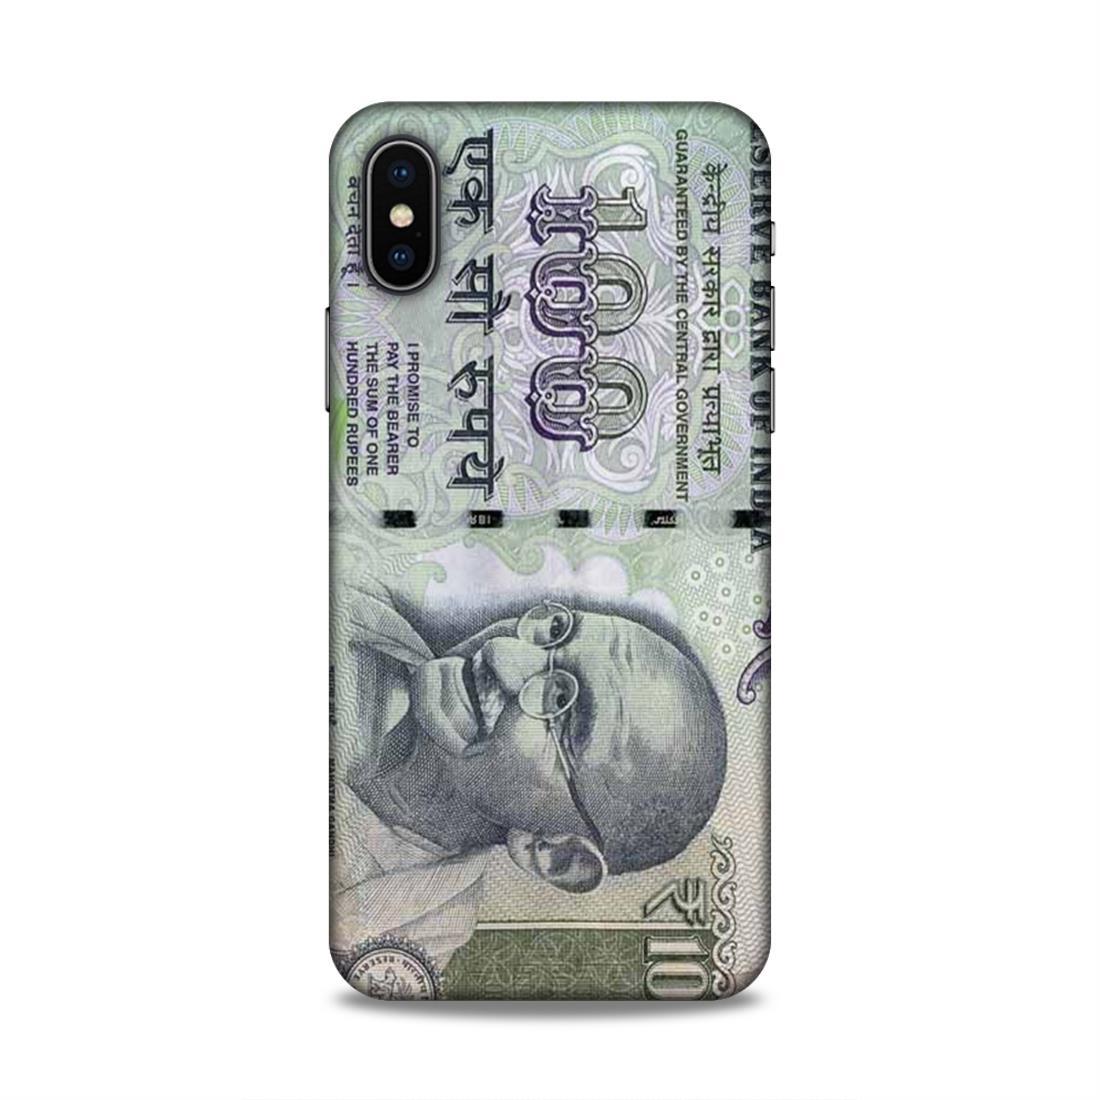 Rs 100 Currency Note iPhone X Phone Cover Case